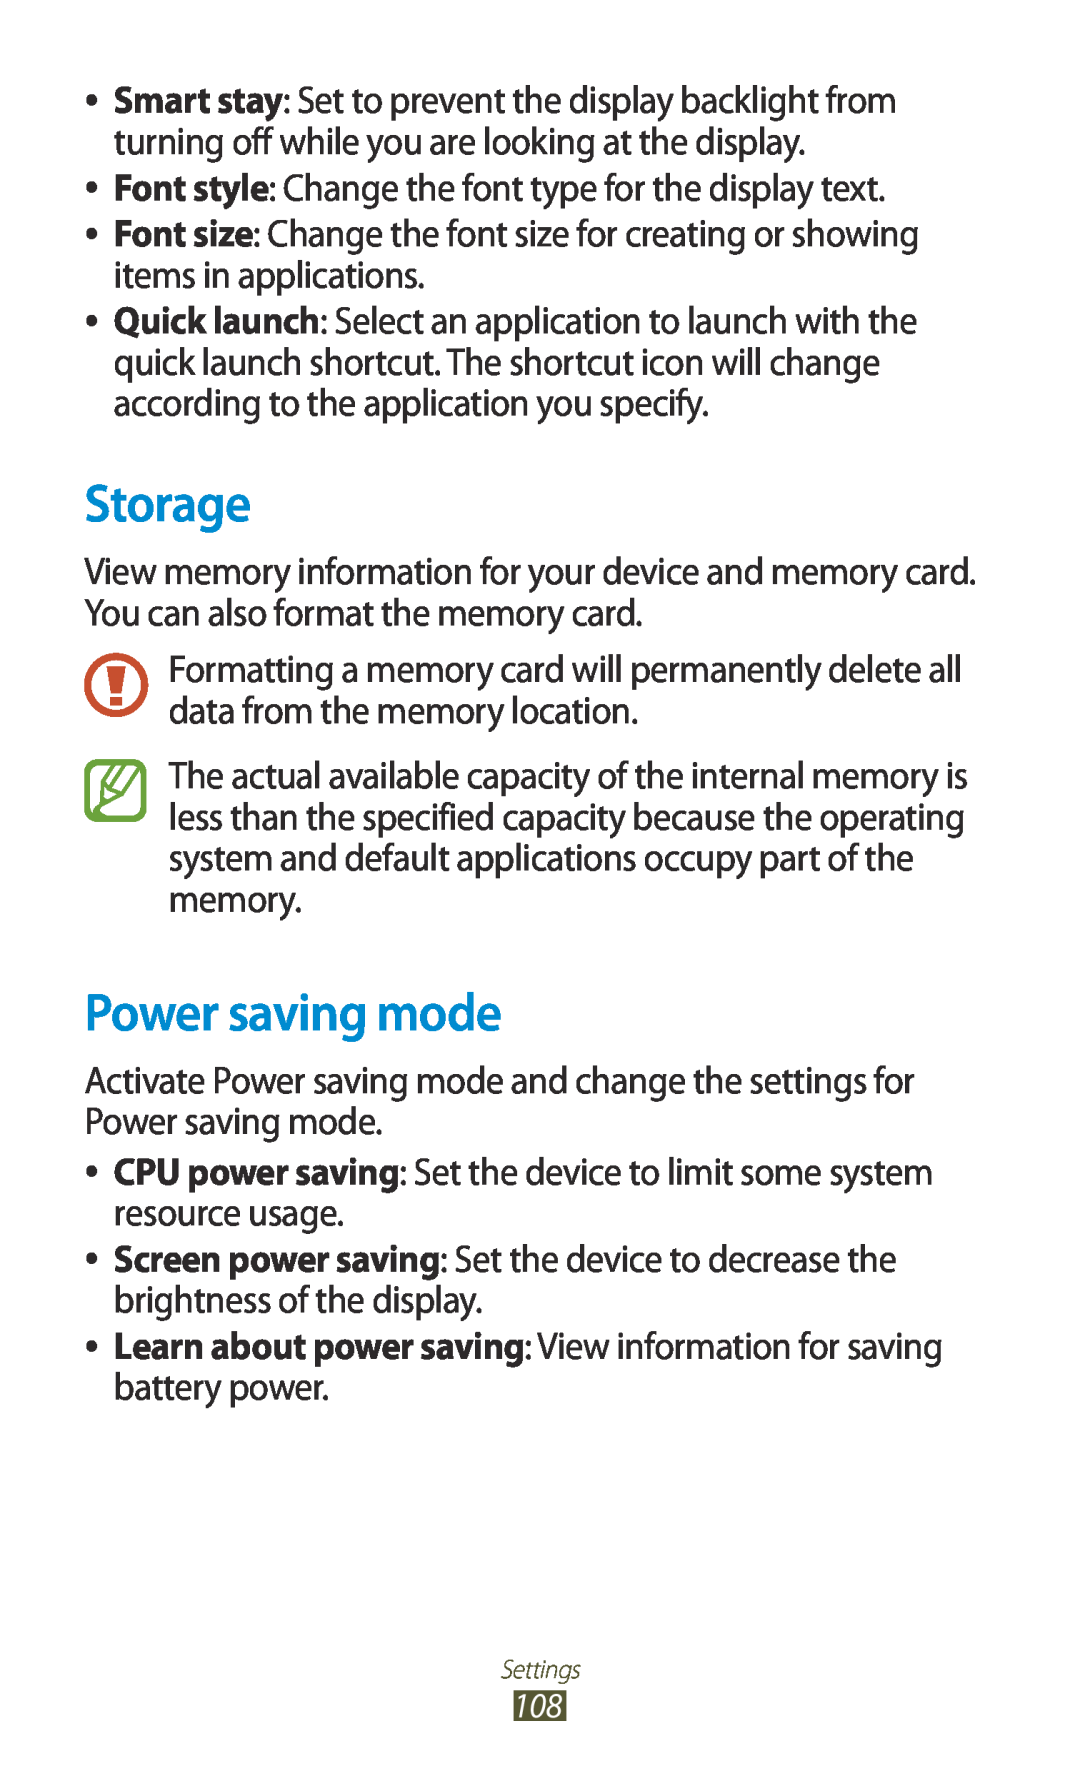 Samsung GTP5110ZWMTTT manual Storage, Power saving mode, Learn about power saving View information for saving battery power 